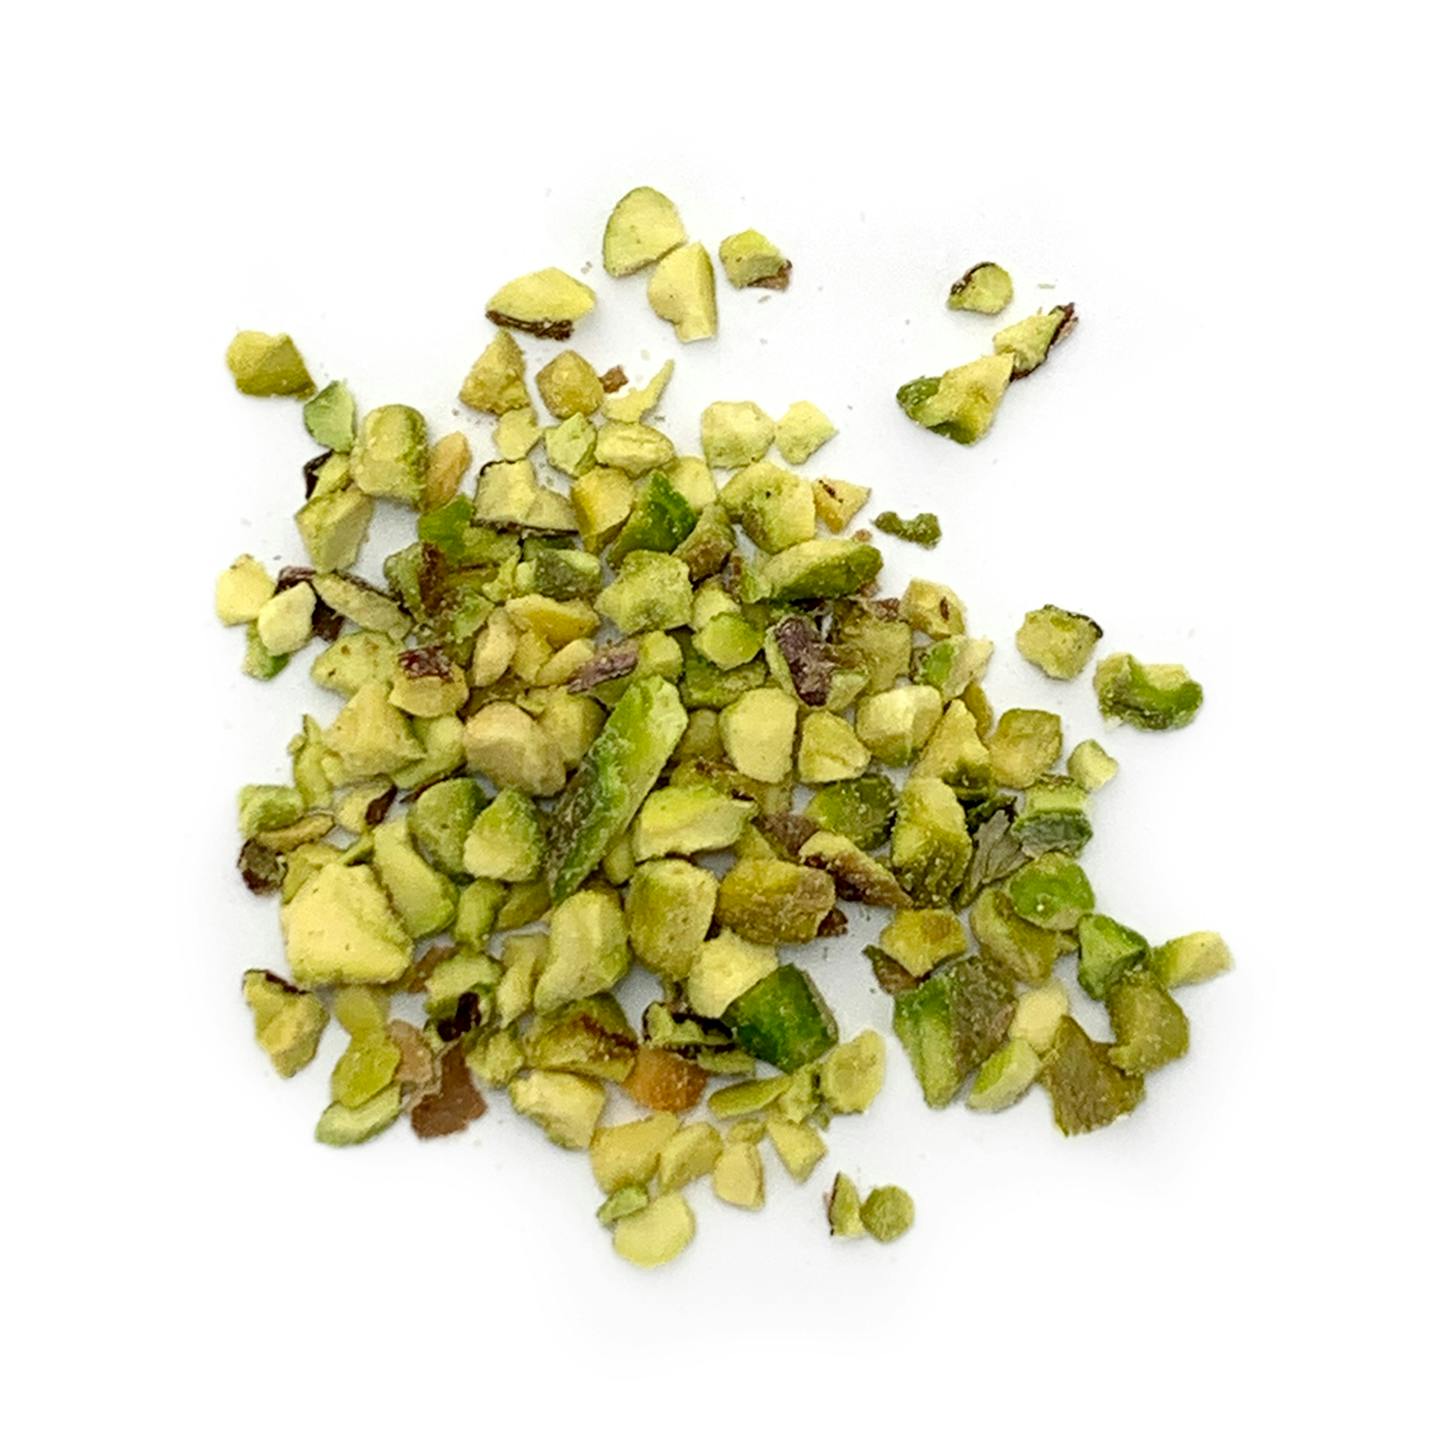 A of crushed pistachios  